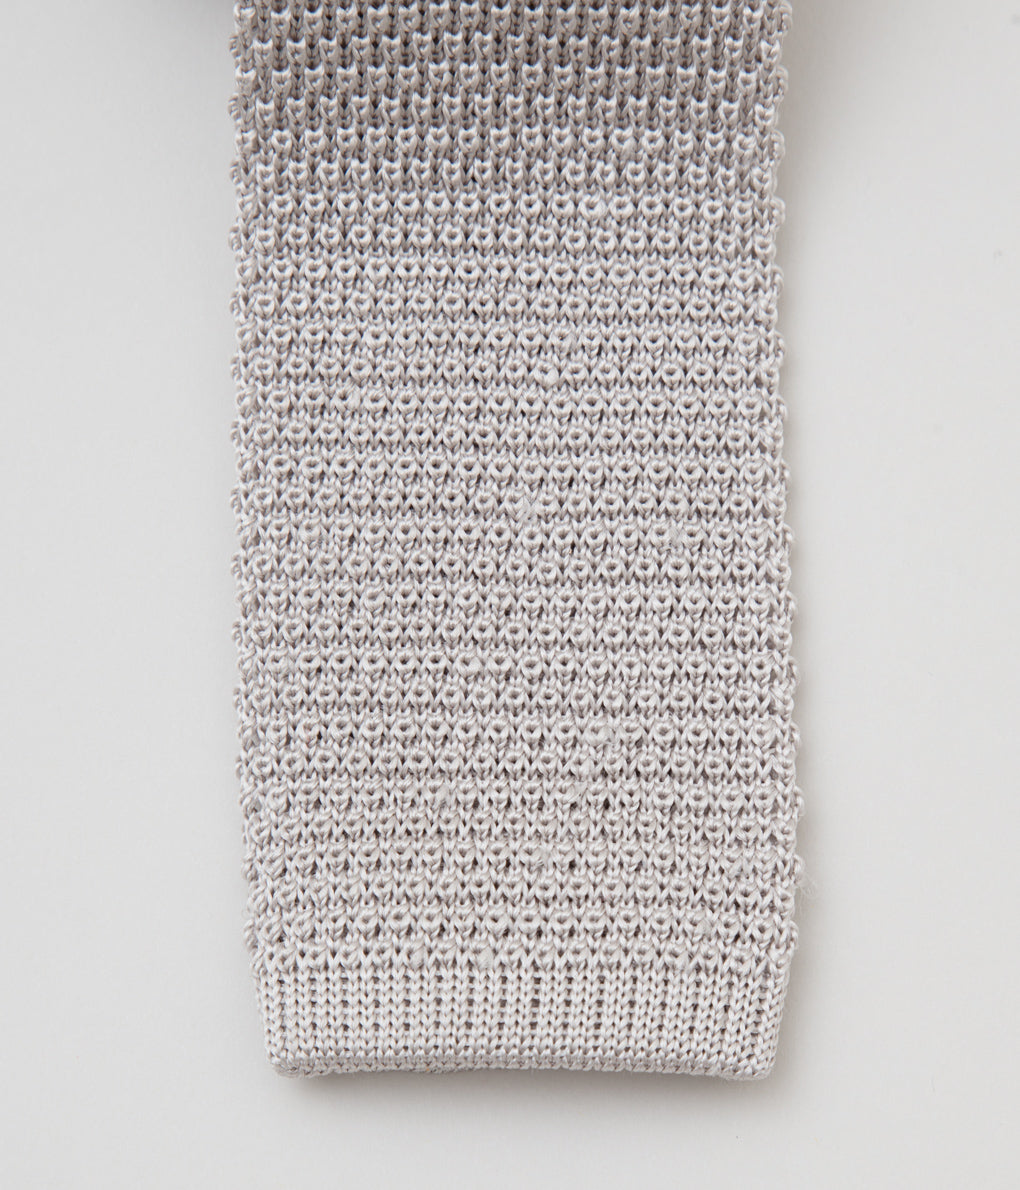 INDIVIDUALIZED ACCESSORIES "KNIT TIE" (SILVER)